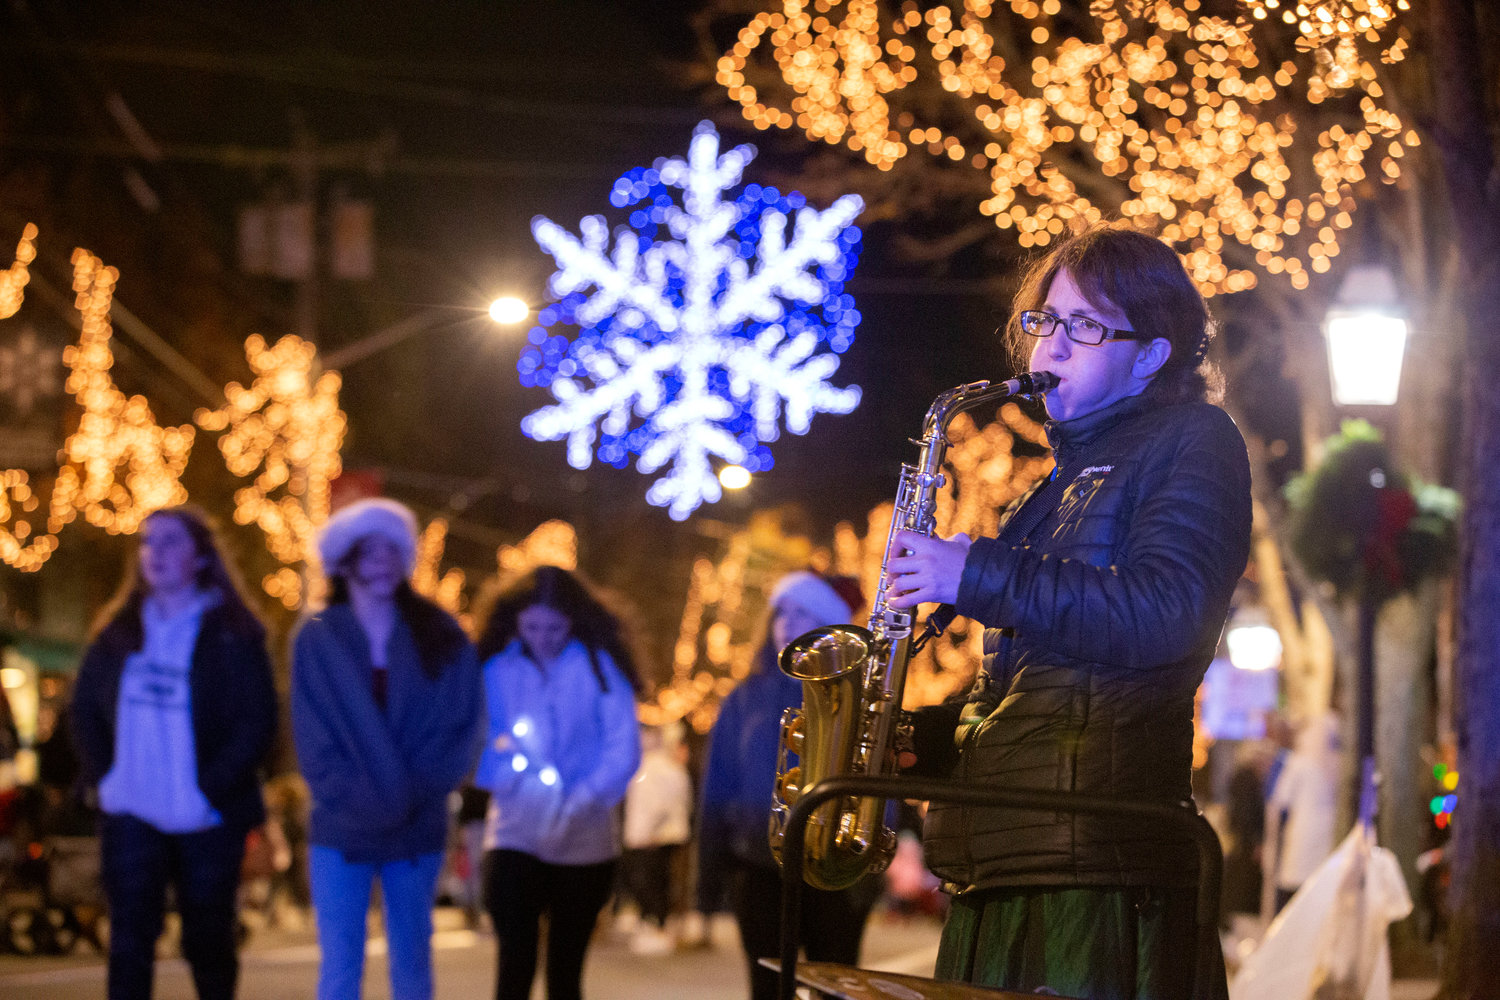 Cass Michael, 43, plays joy to the world on her alto sax on Hope Street as residents walk home. She had been coming to the grand illumination for years with friend Steve Parella of Bristol, who recently passed away due to illness.